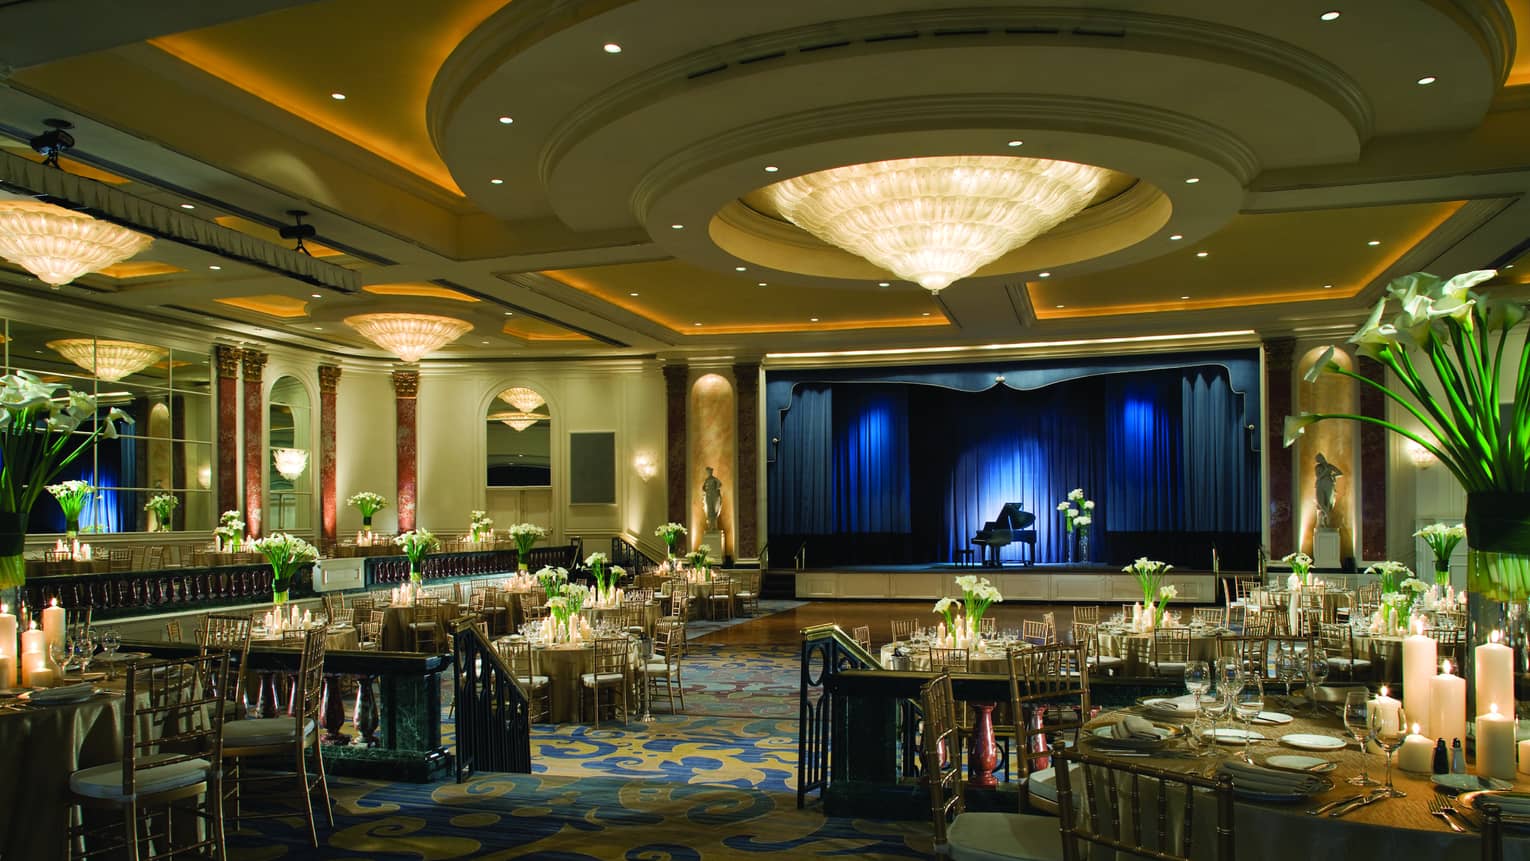 Cone shaped chandelier and round ceiling over banquet room dance floor by stage with baby grand piano, blue lights